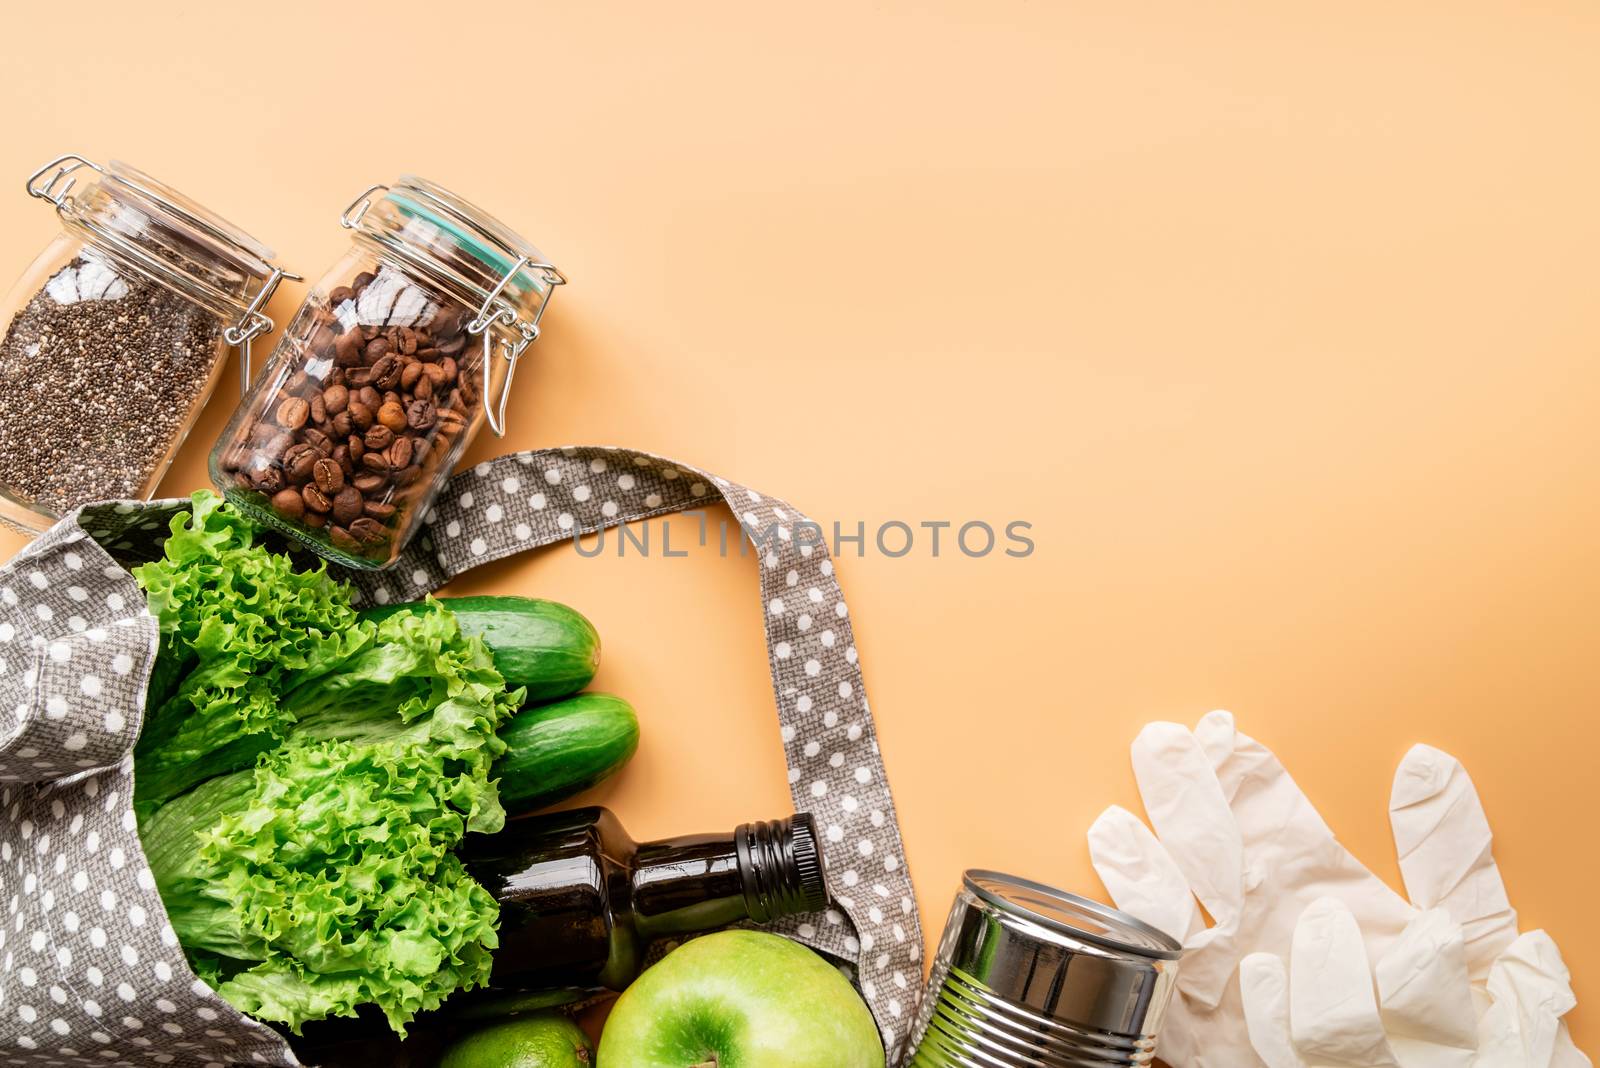 Coronavirus food supplies concept. Food layout with green vegetables, lettuce, olive oil, chia seeds, gloves in eco friendly bag on orange background. Flat lay. Copy space.